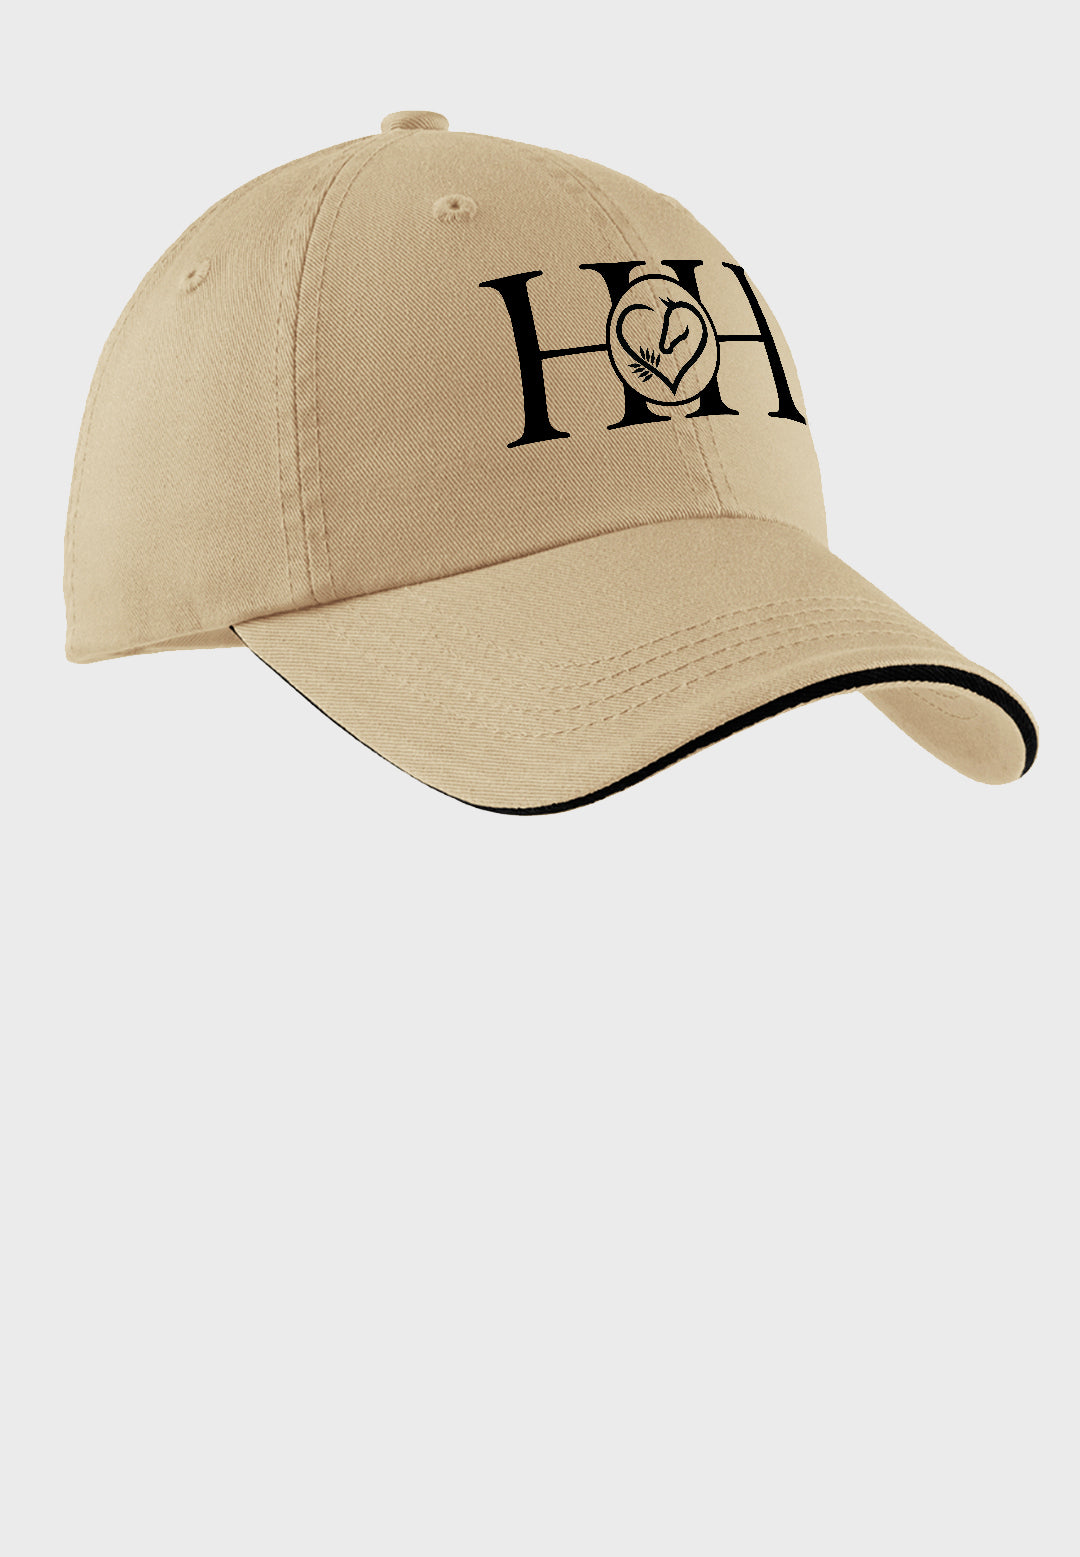 Hart and Horse Port Authority® Sandwich Bill Cap with Striped Closure - Stone/Black